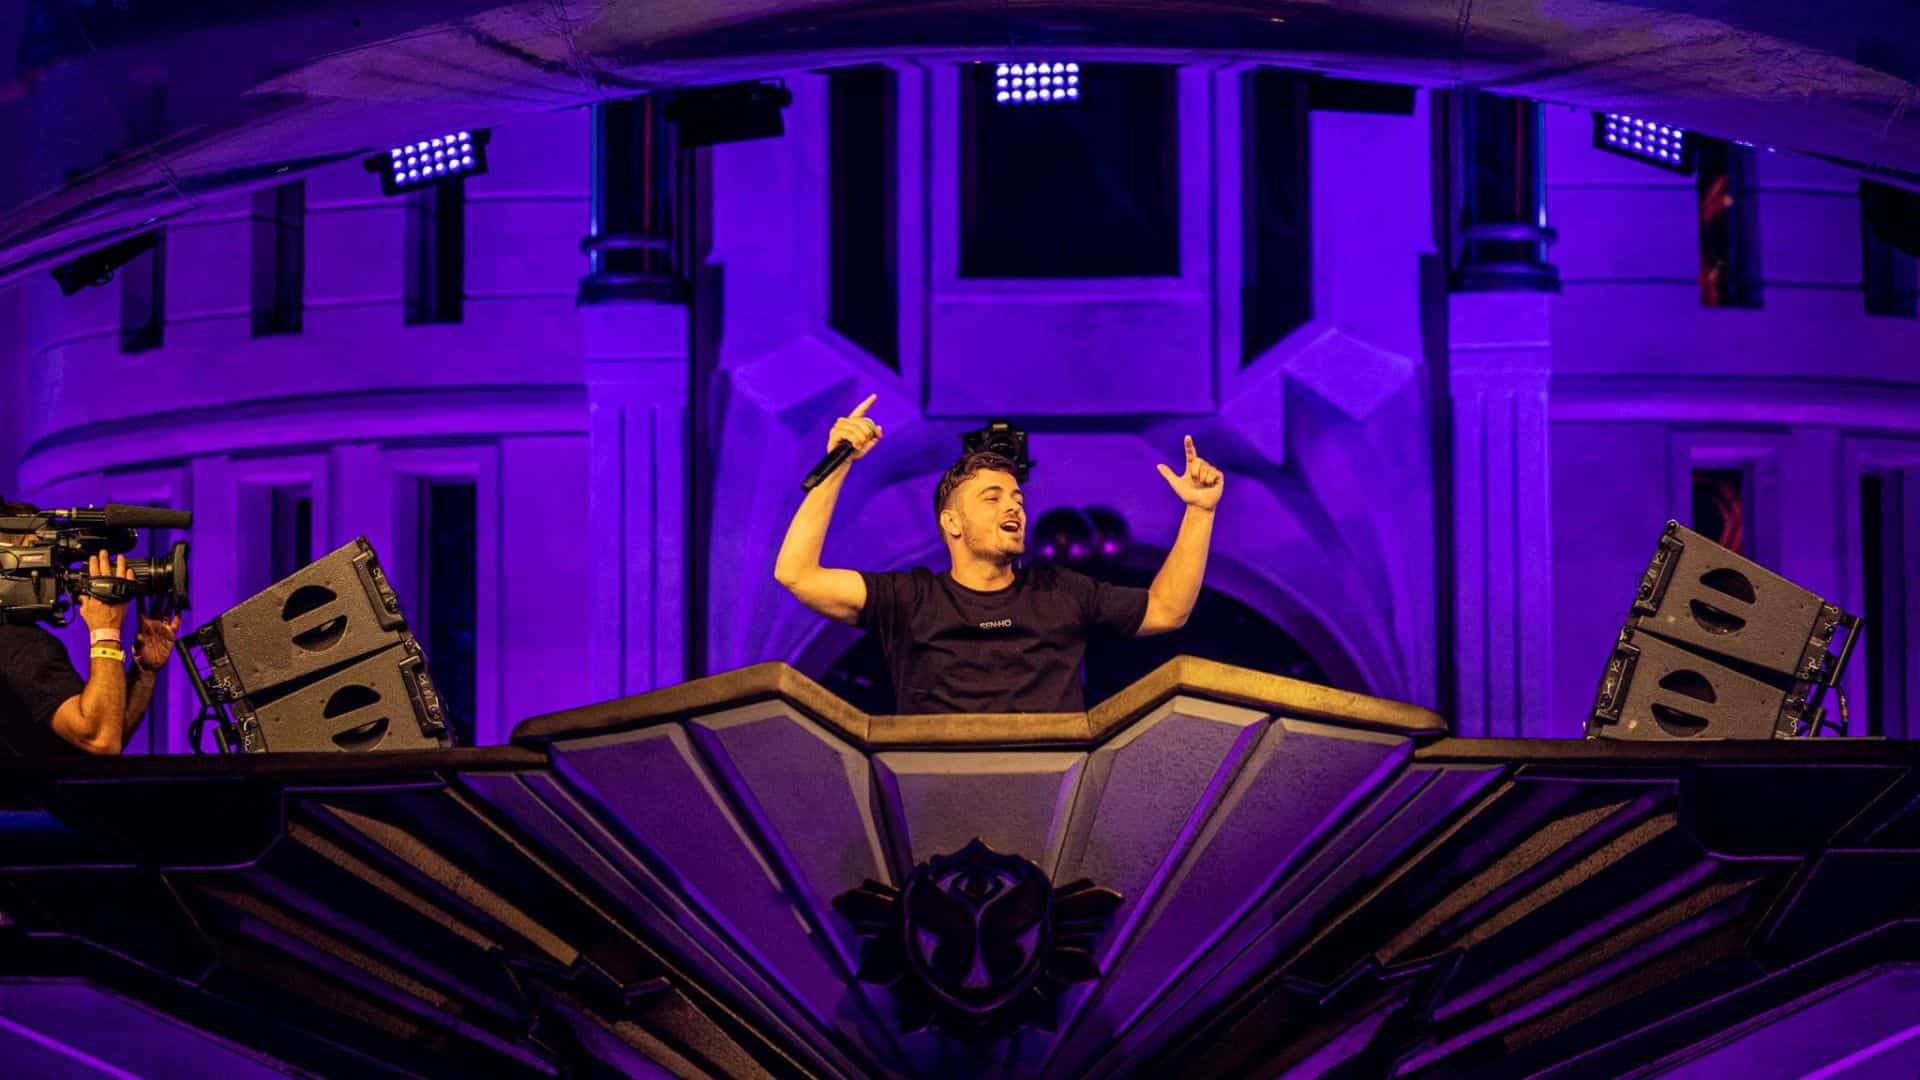 Martin Garrix closes out weekend one of Tomorrowland 2022 in epic fashion [Video]